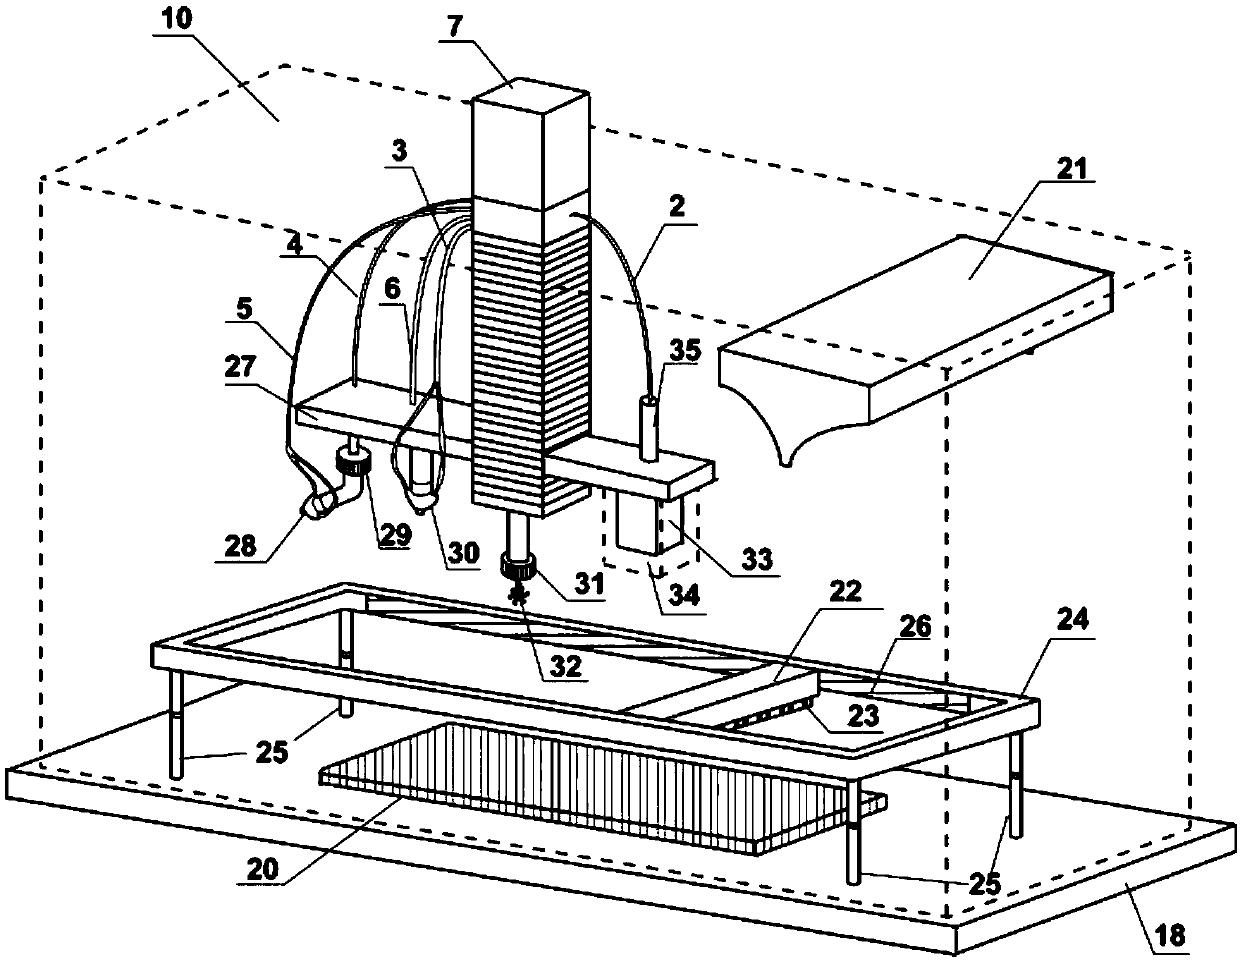 Laser additive manufacturing equipment and method for metal parts